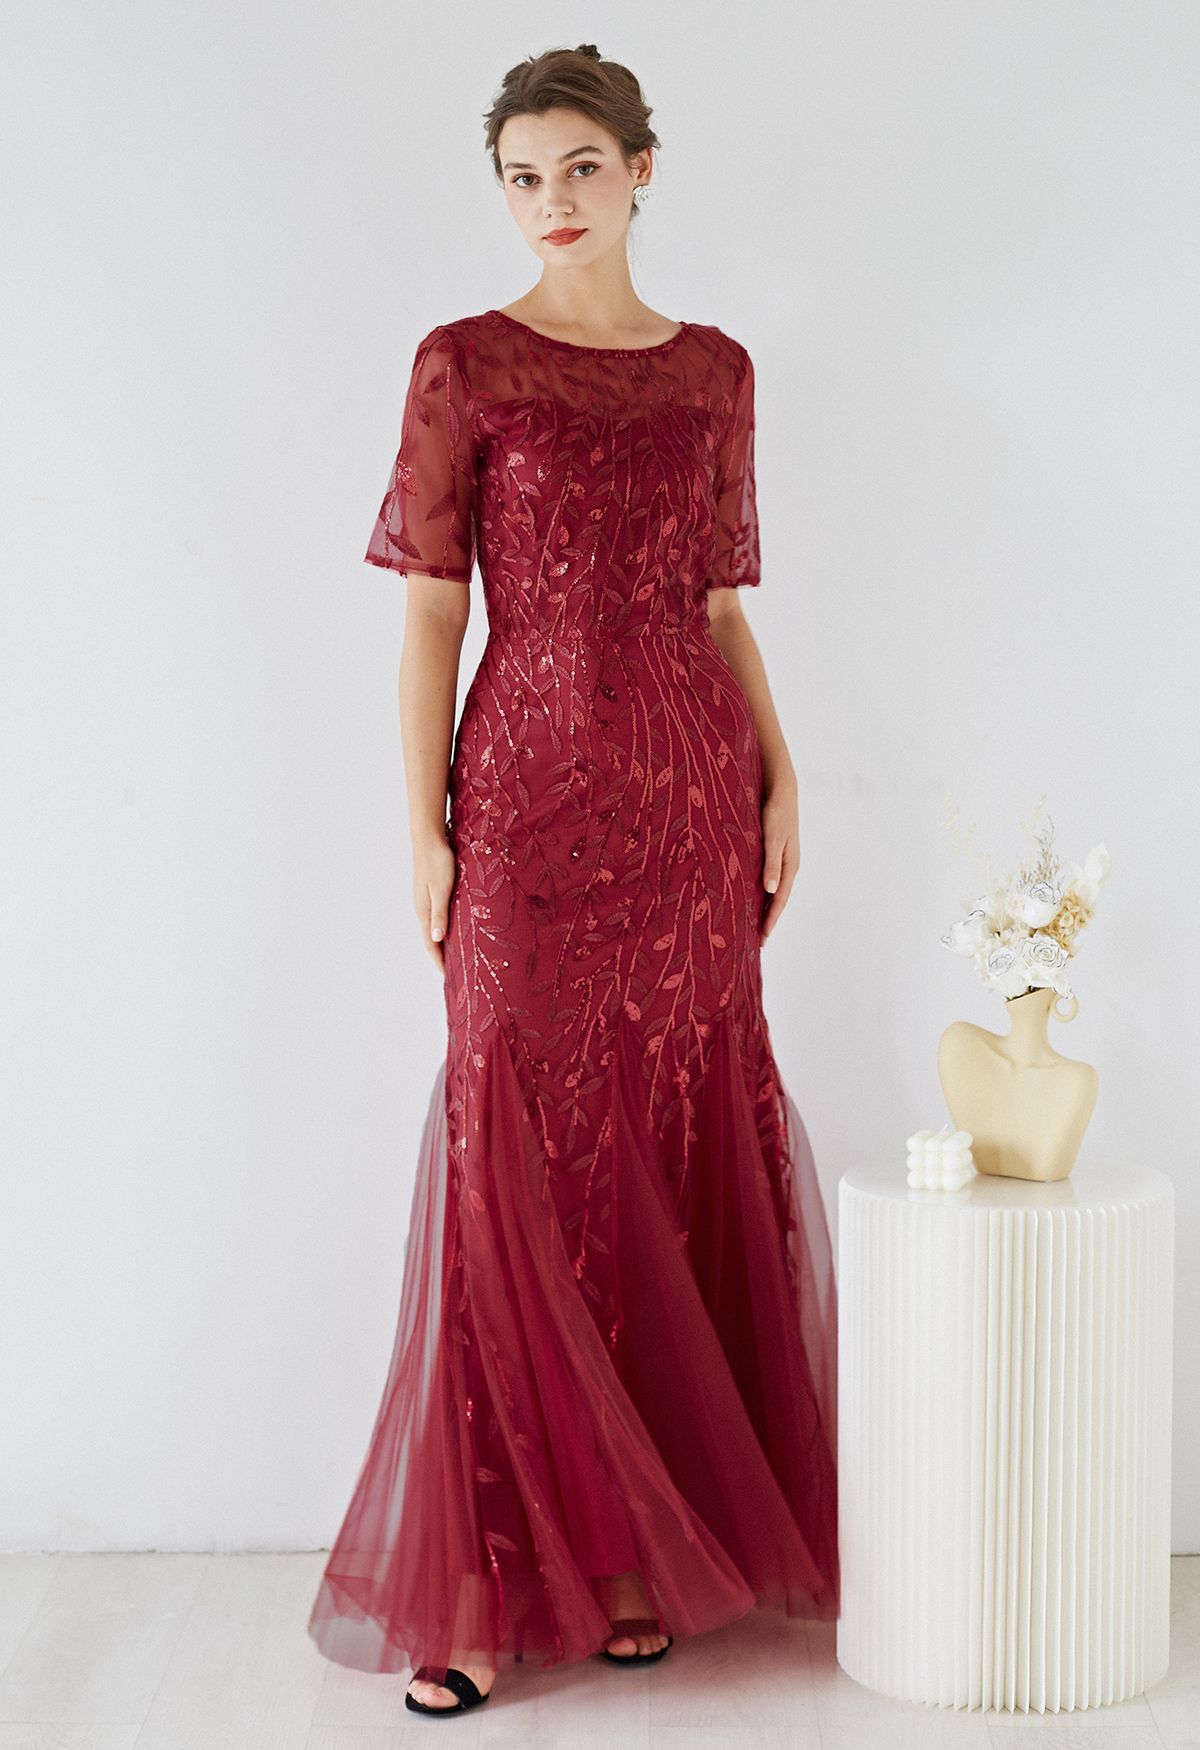 Leaves Branch Sequined Mesh Panelled Gown in Burgundy